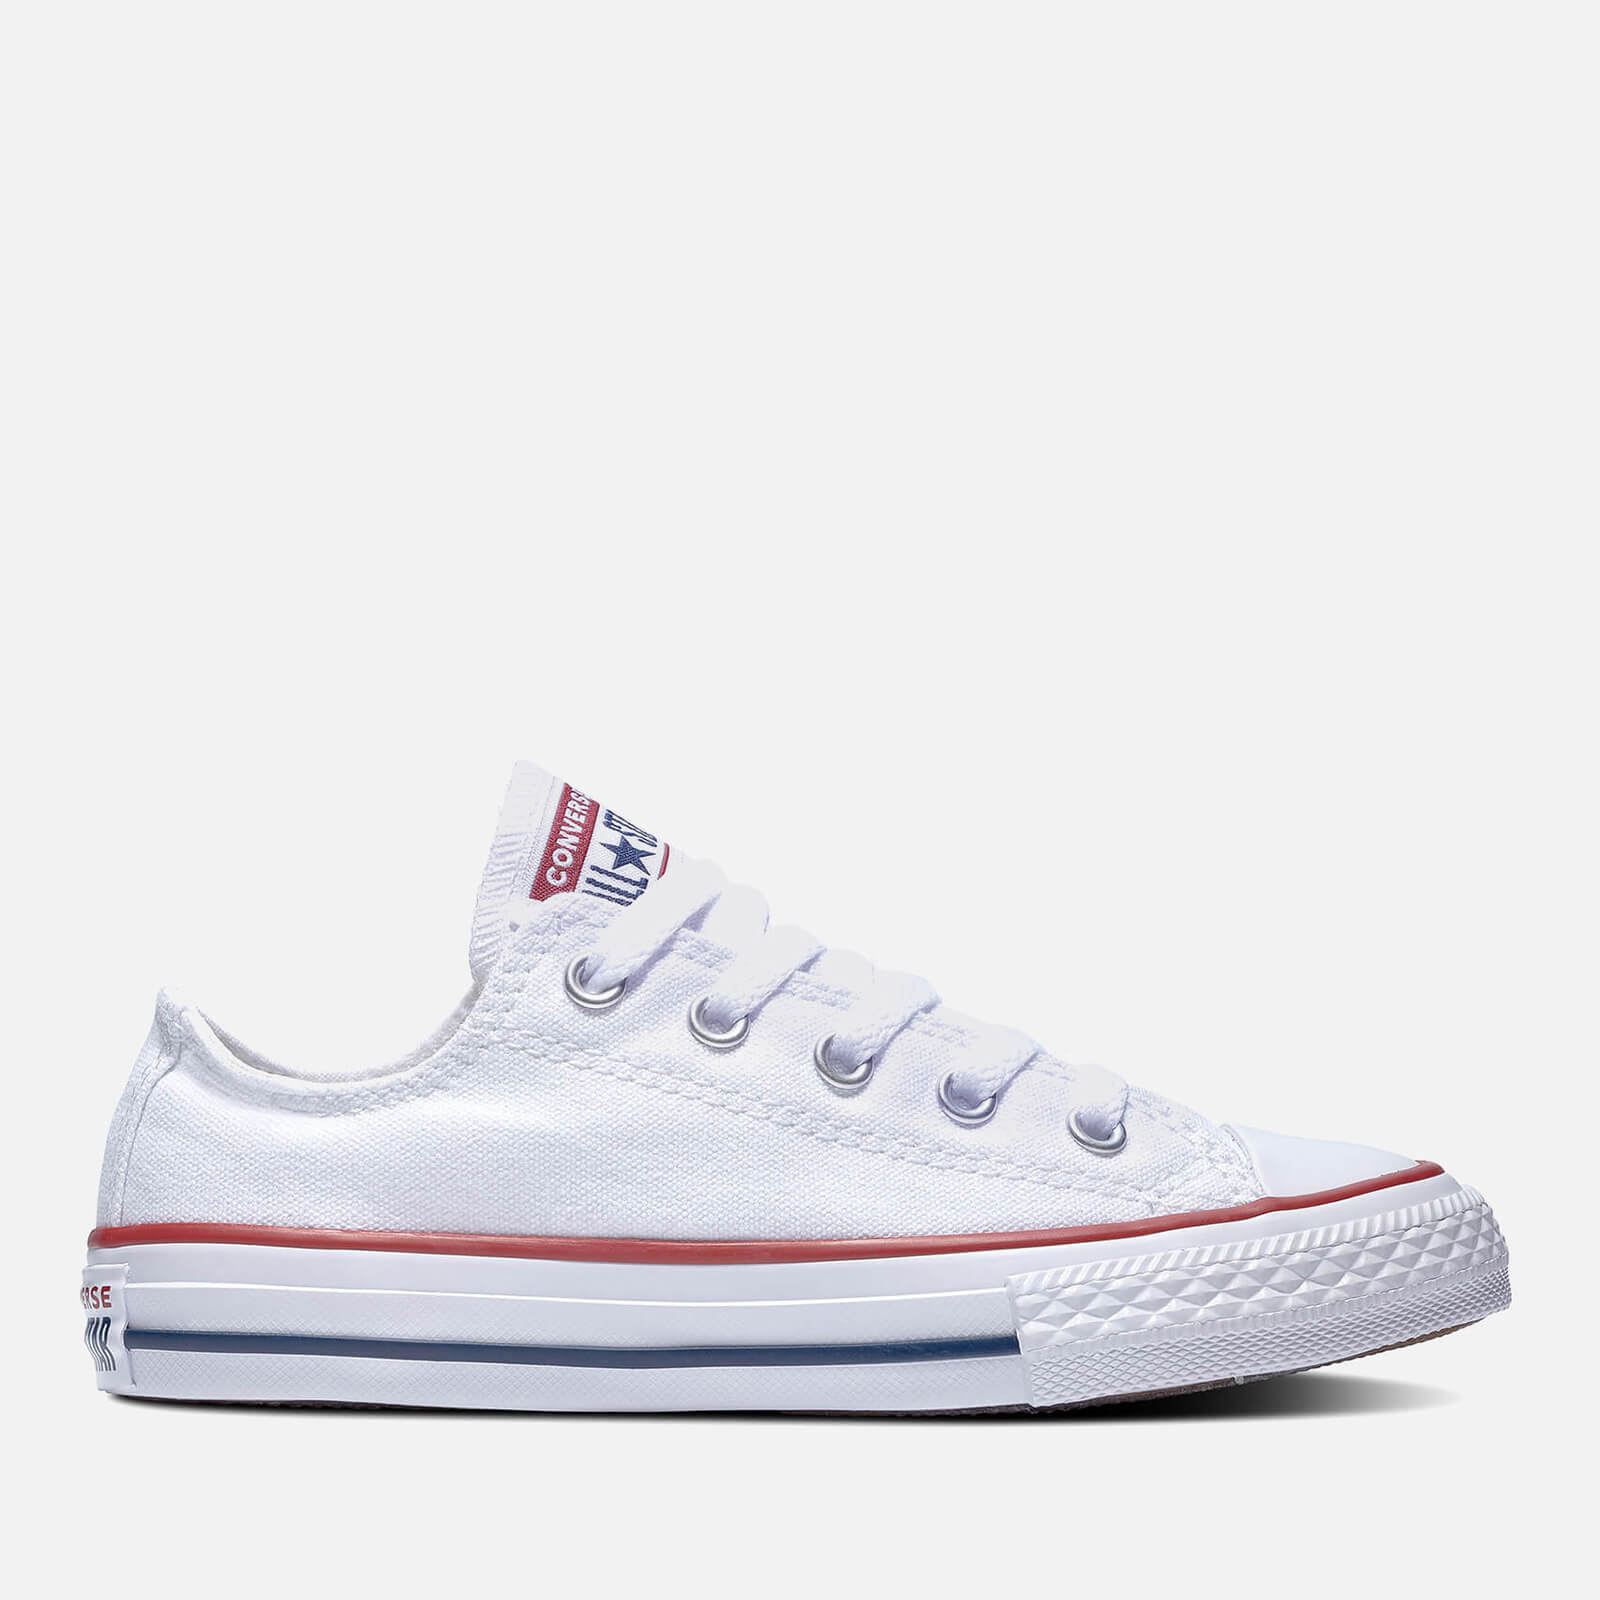 converse kids' chuck taylor all star ox trainers - white - uk 1 kids